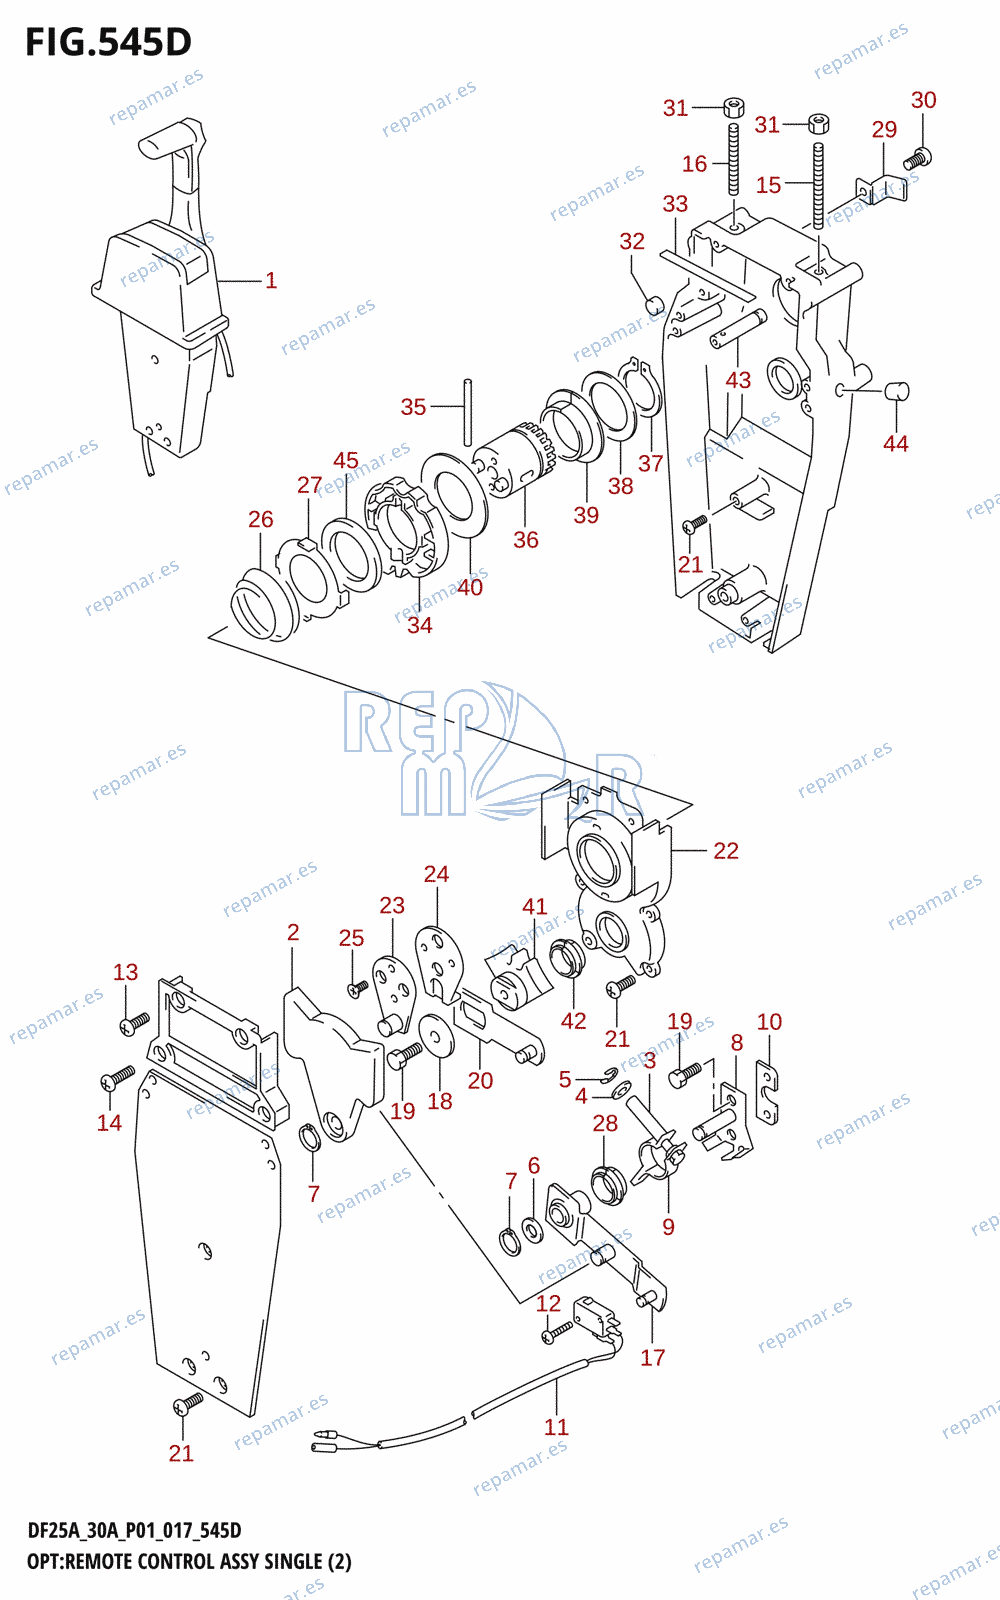 545D - OPT:REMOTE CONTROL ASSY SINGLE (2) (DF30AT:P01)